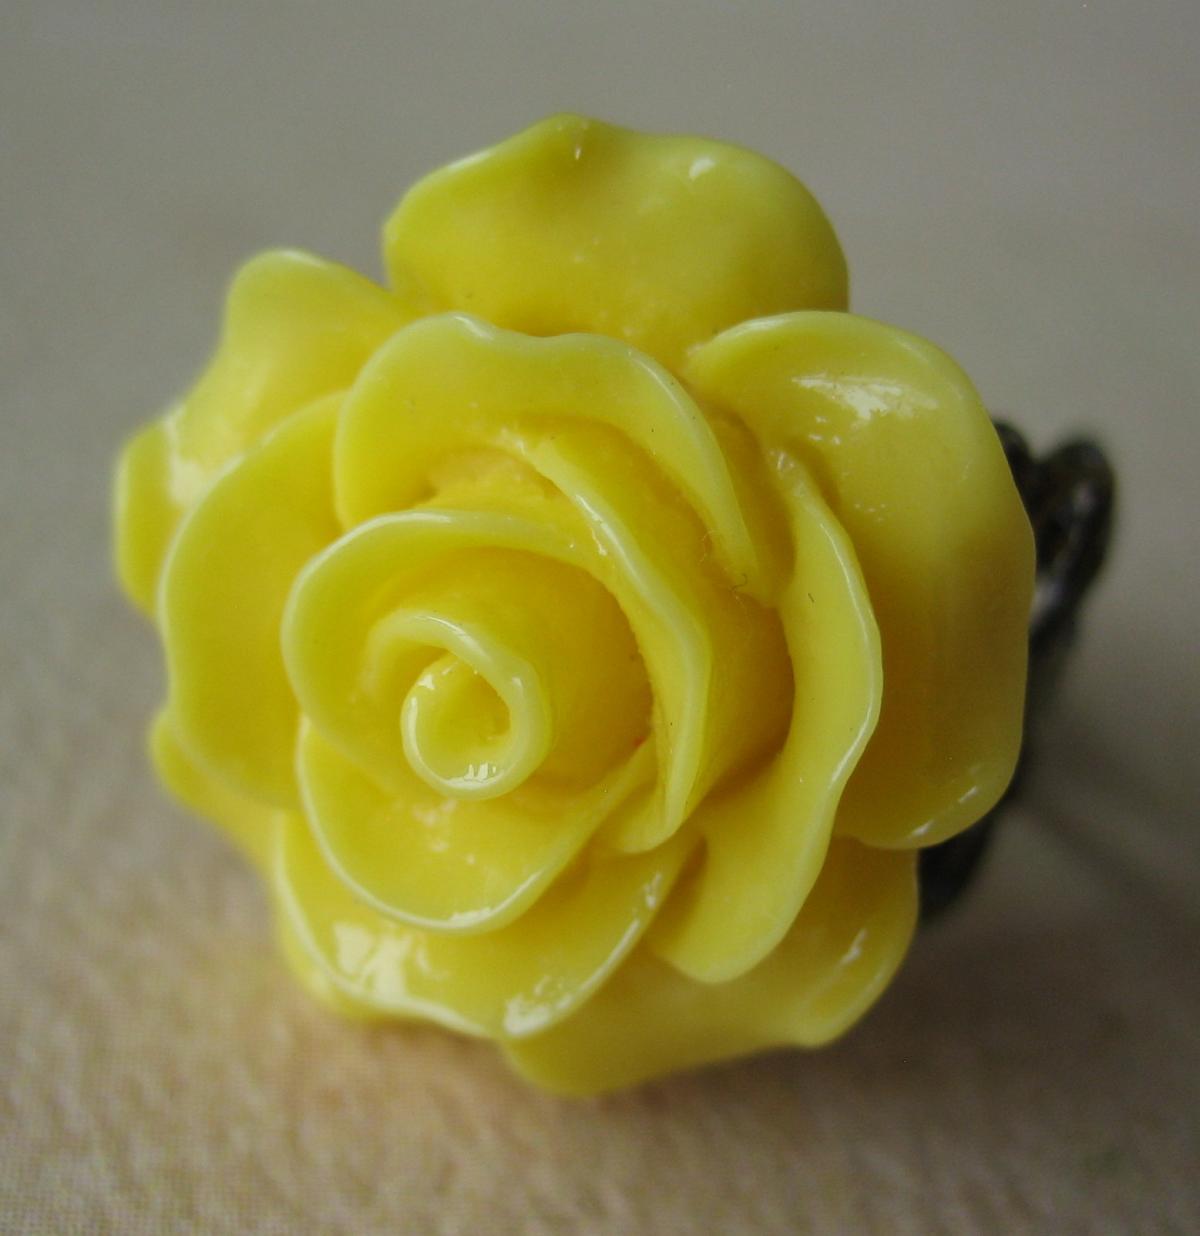 Sunshine Yellow Rose On Antique Brass Filigree Ring - Adjustable - Jewelry By Five